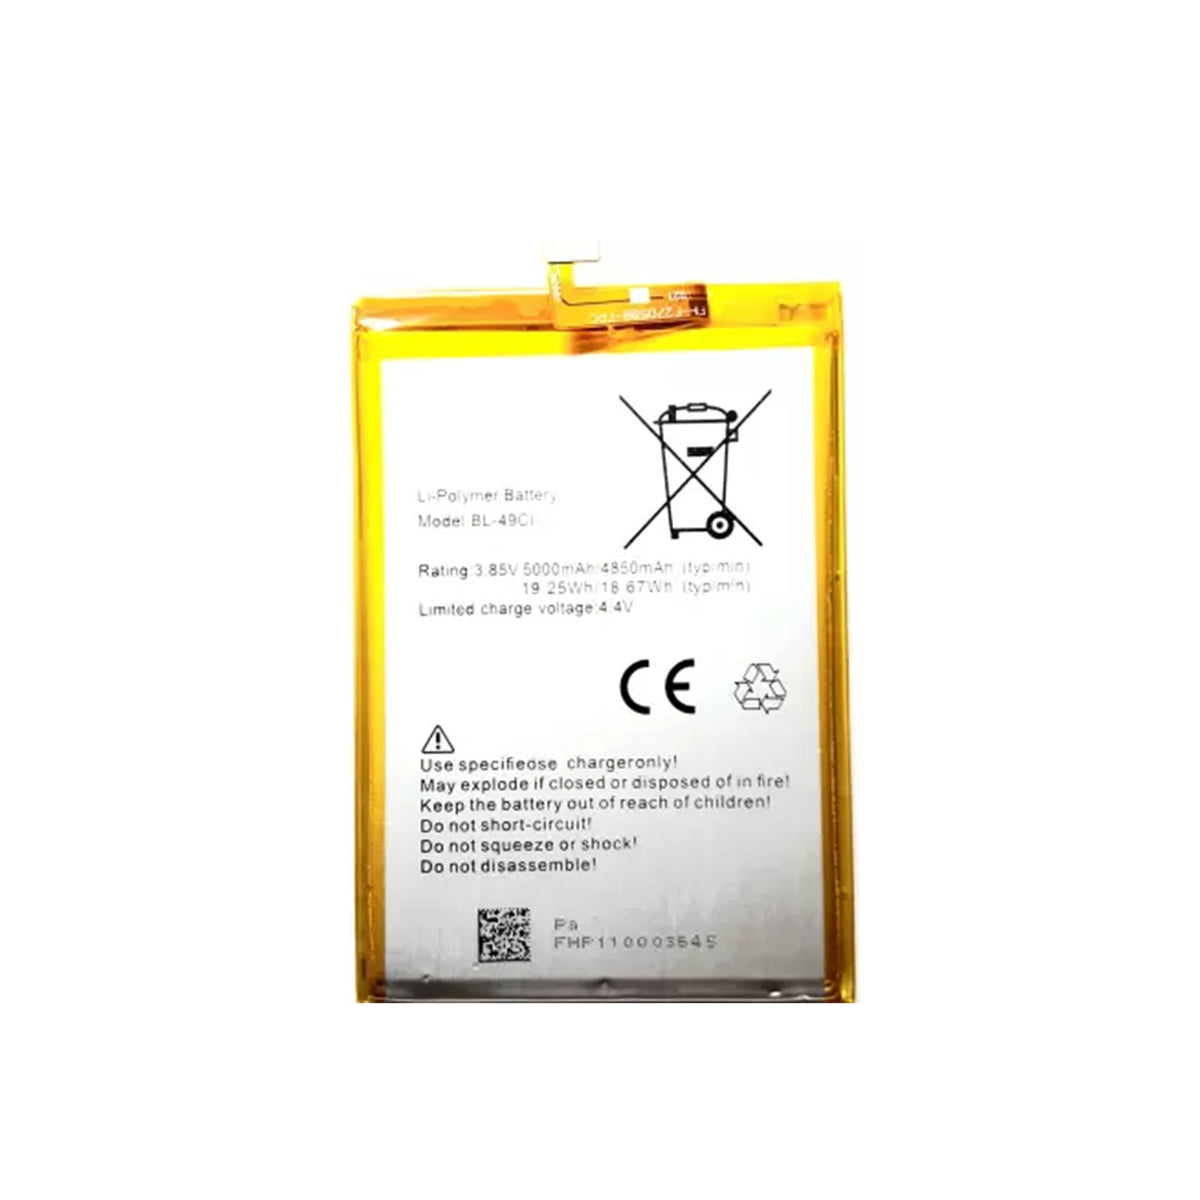 MOBILE BATTERY FOR ITELL BL49CI